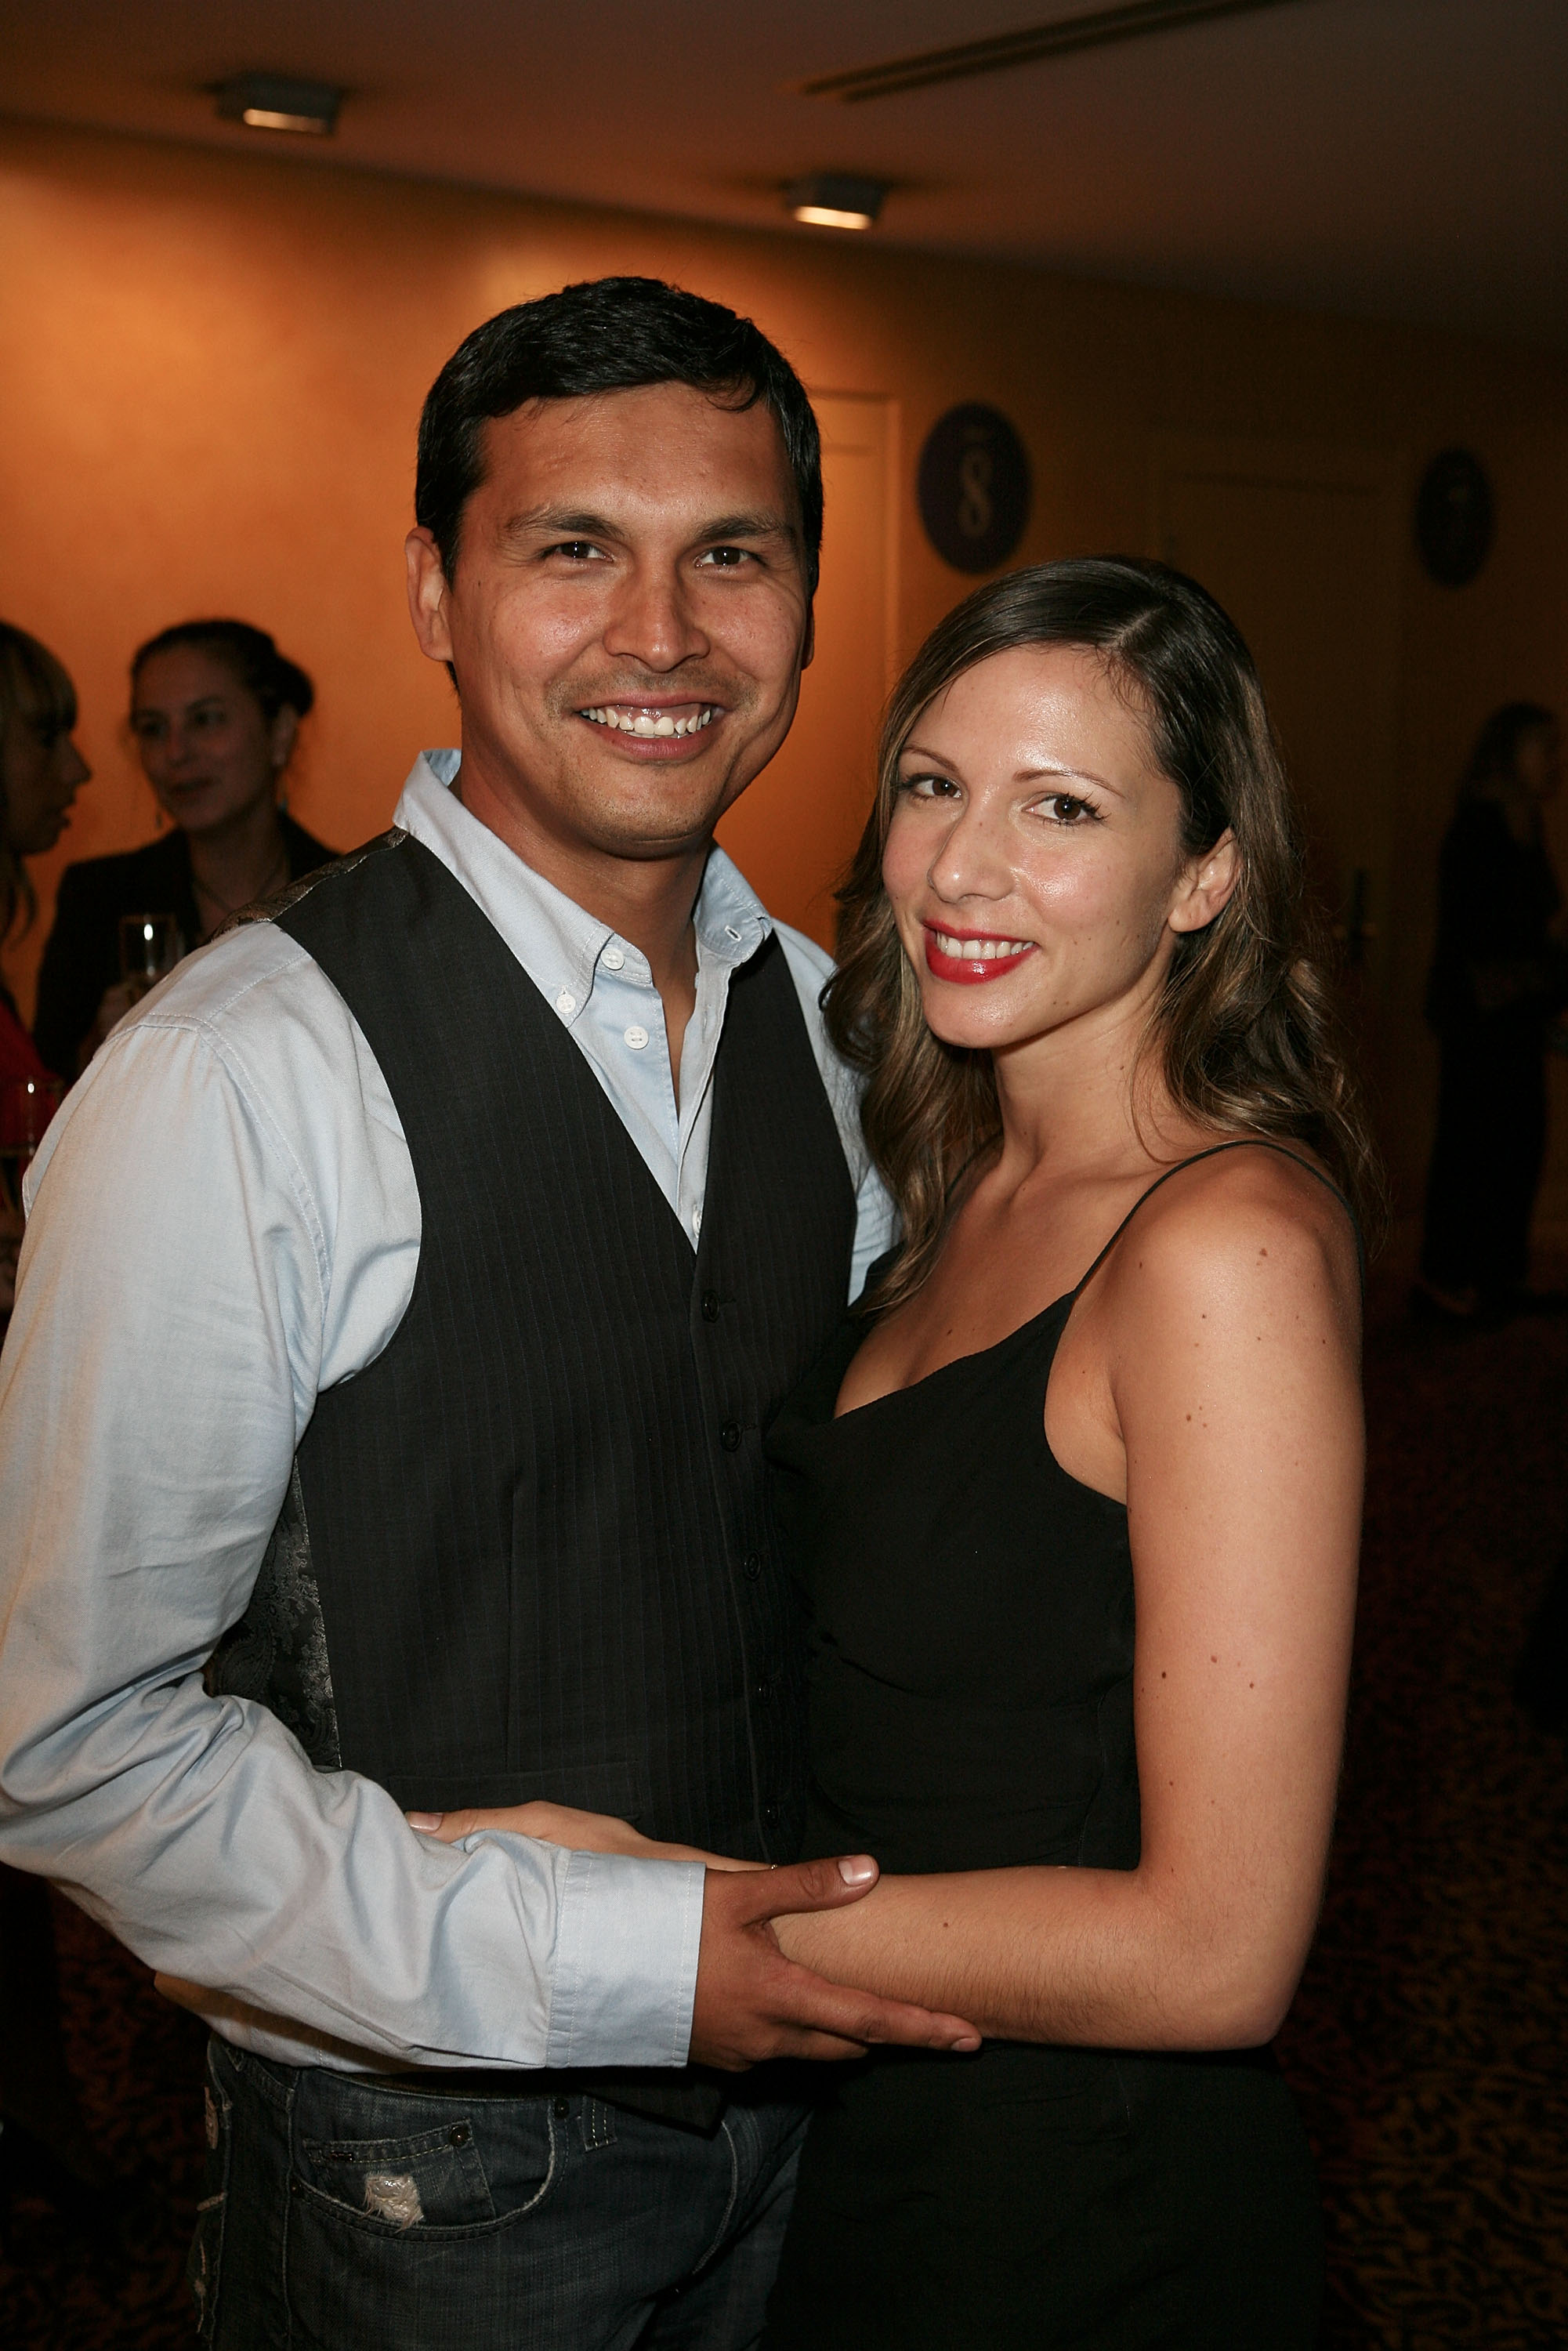 Adam Beach and Summer Tiger at the opening night performance of "August: Osage County" at the Center Theatre Group/Ahmanson Theatre on September 9, 2009, in Los Angeles, California. | Source: Getty Images